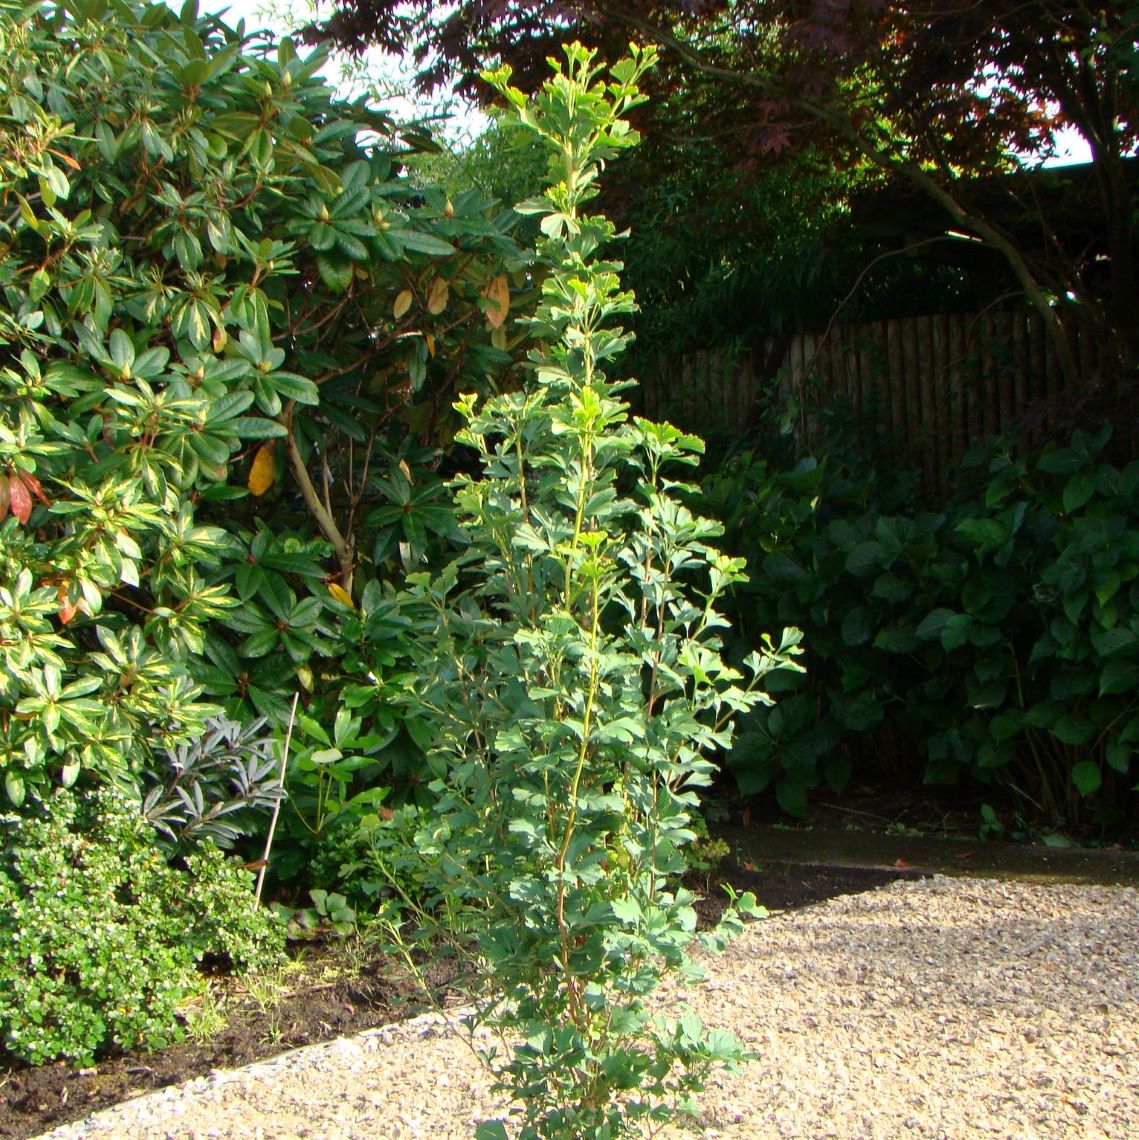 Strictly upright Skinny Fit ginkgo planted in a stone garden.